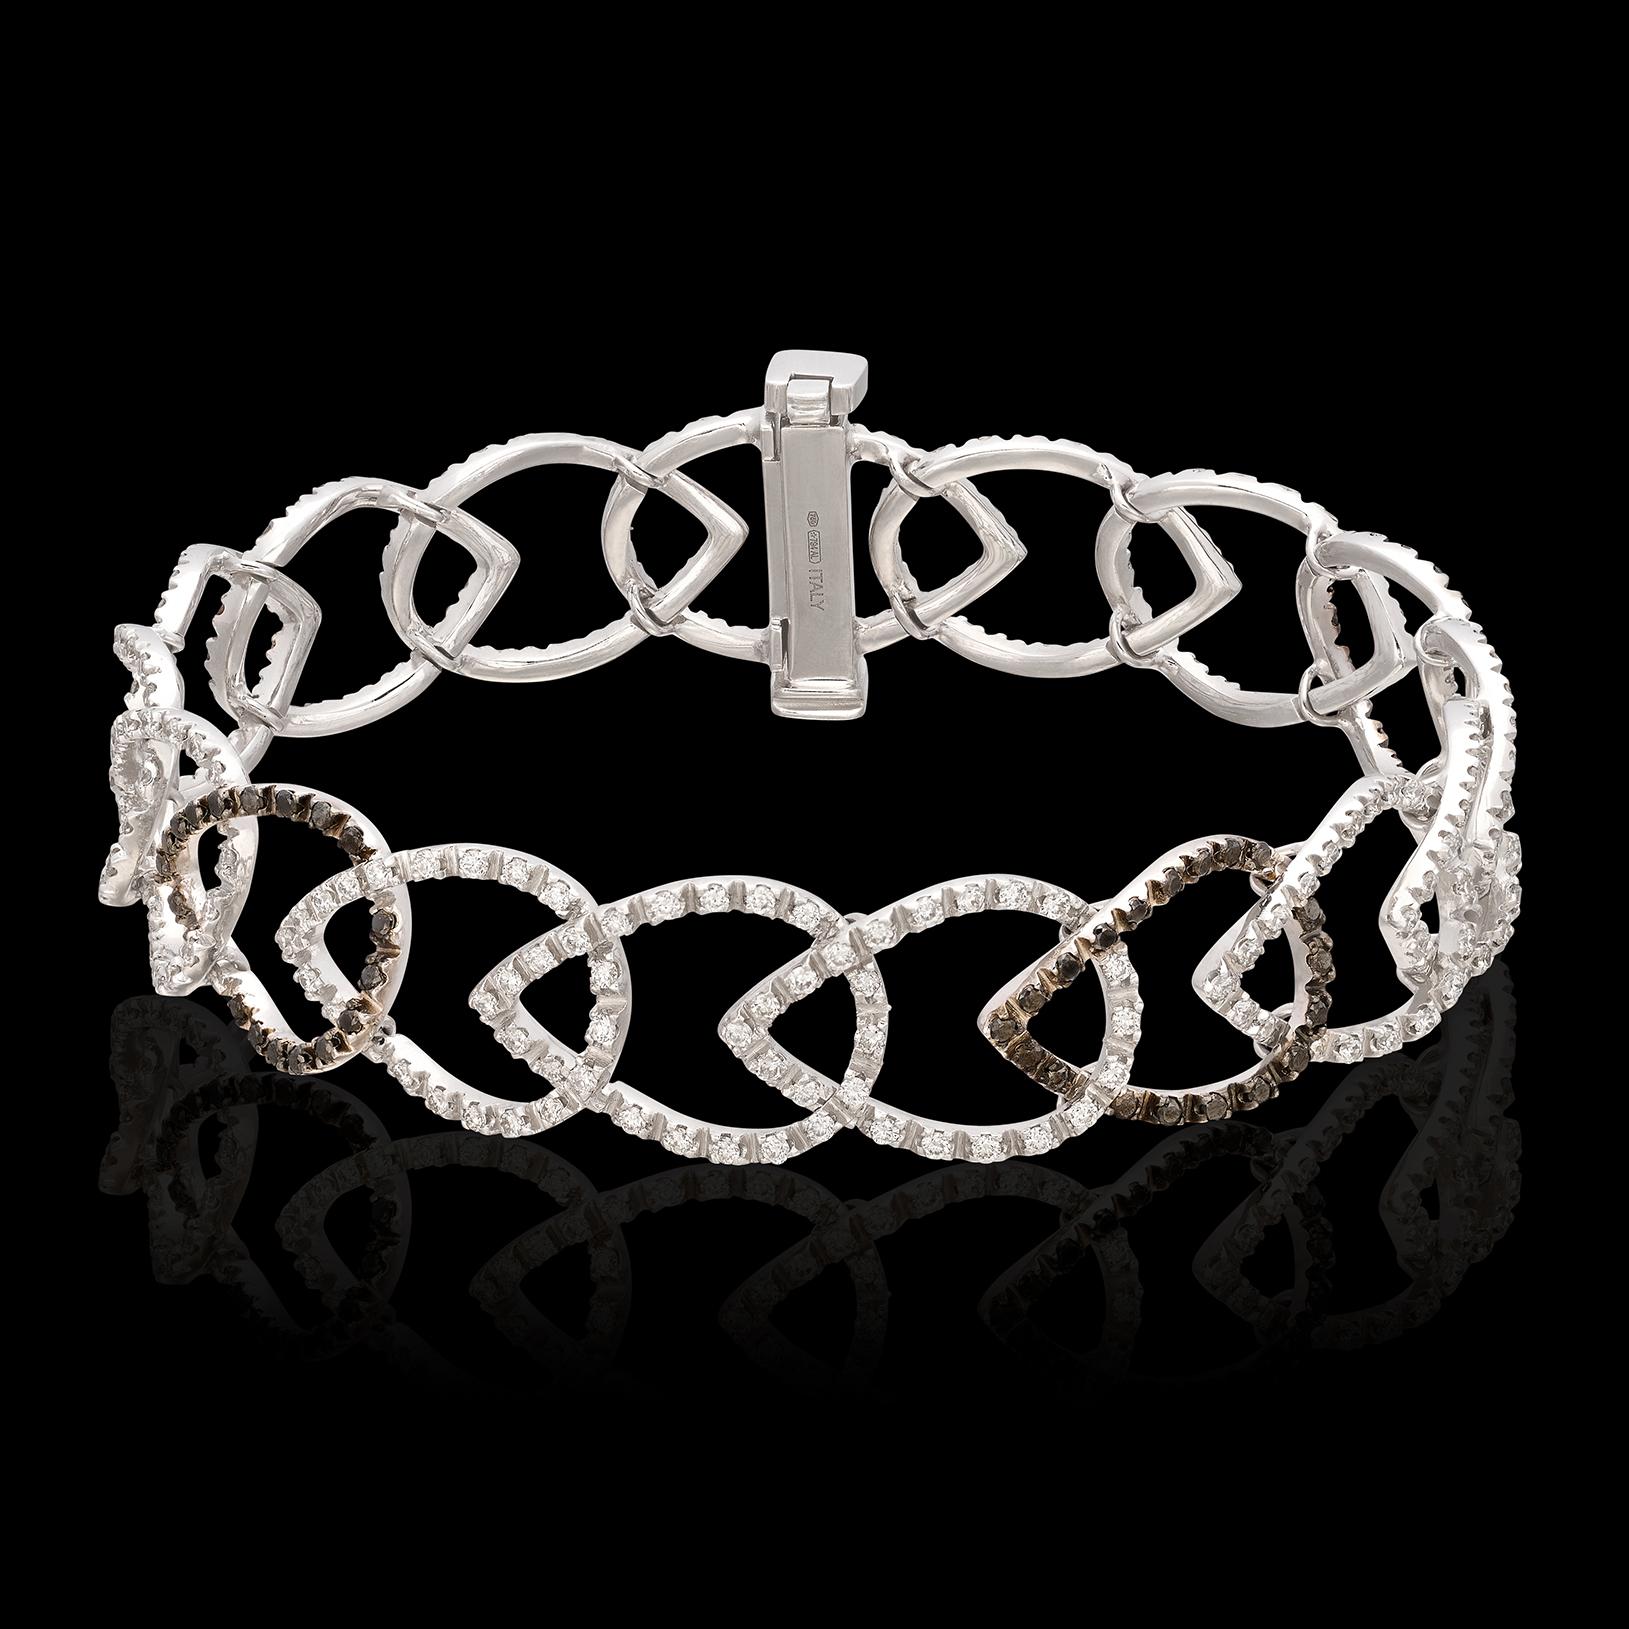 From the world of Italian design, this eye-catching bracelet is delicate and bold at the same time! Designed in 18k white gold, it featured interlocking tear-drop shaped links, set with round brilliant-cut diamonds weighing 1.92 carats and